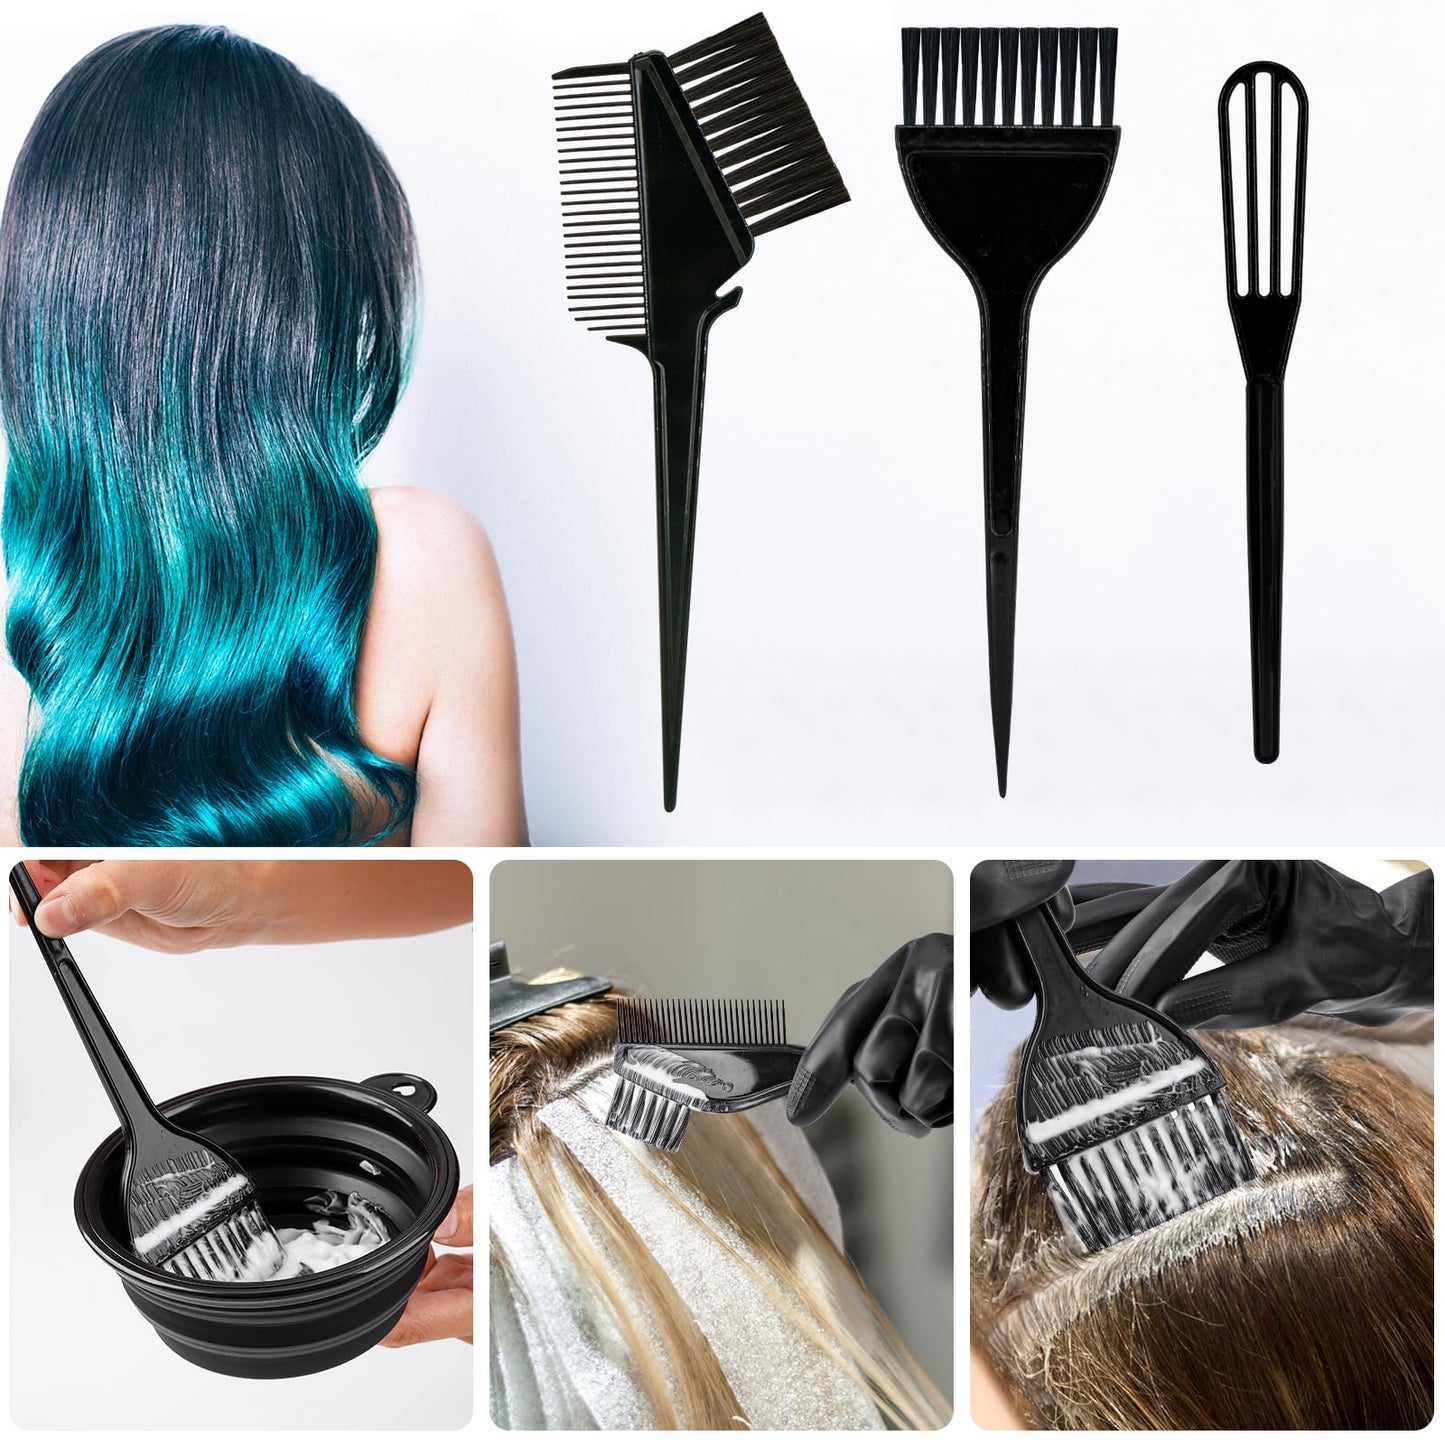 Xarchy 19-Piece Professional Hair Coloring Kit - Salon-Quality Hair Dye Tools Including Brush, Bowl for At-Home Use